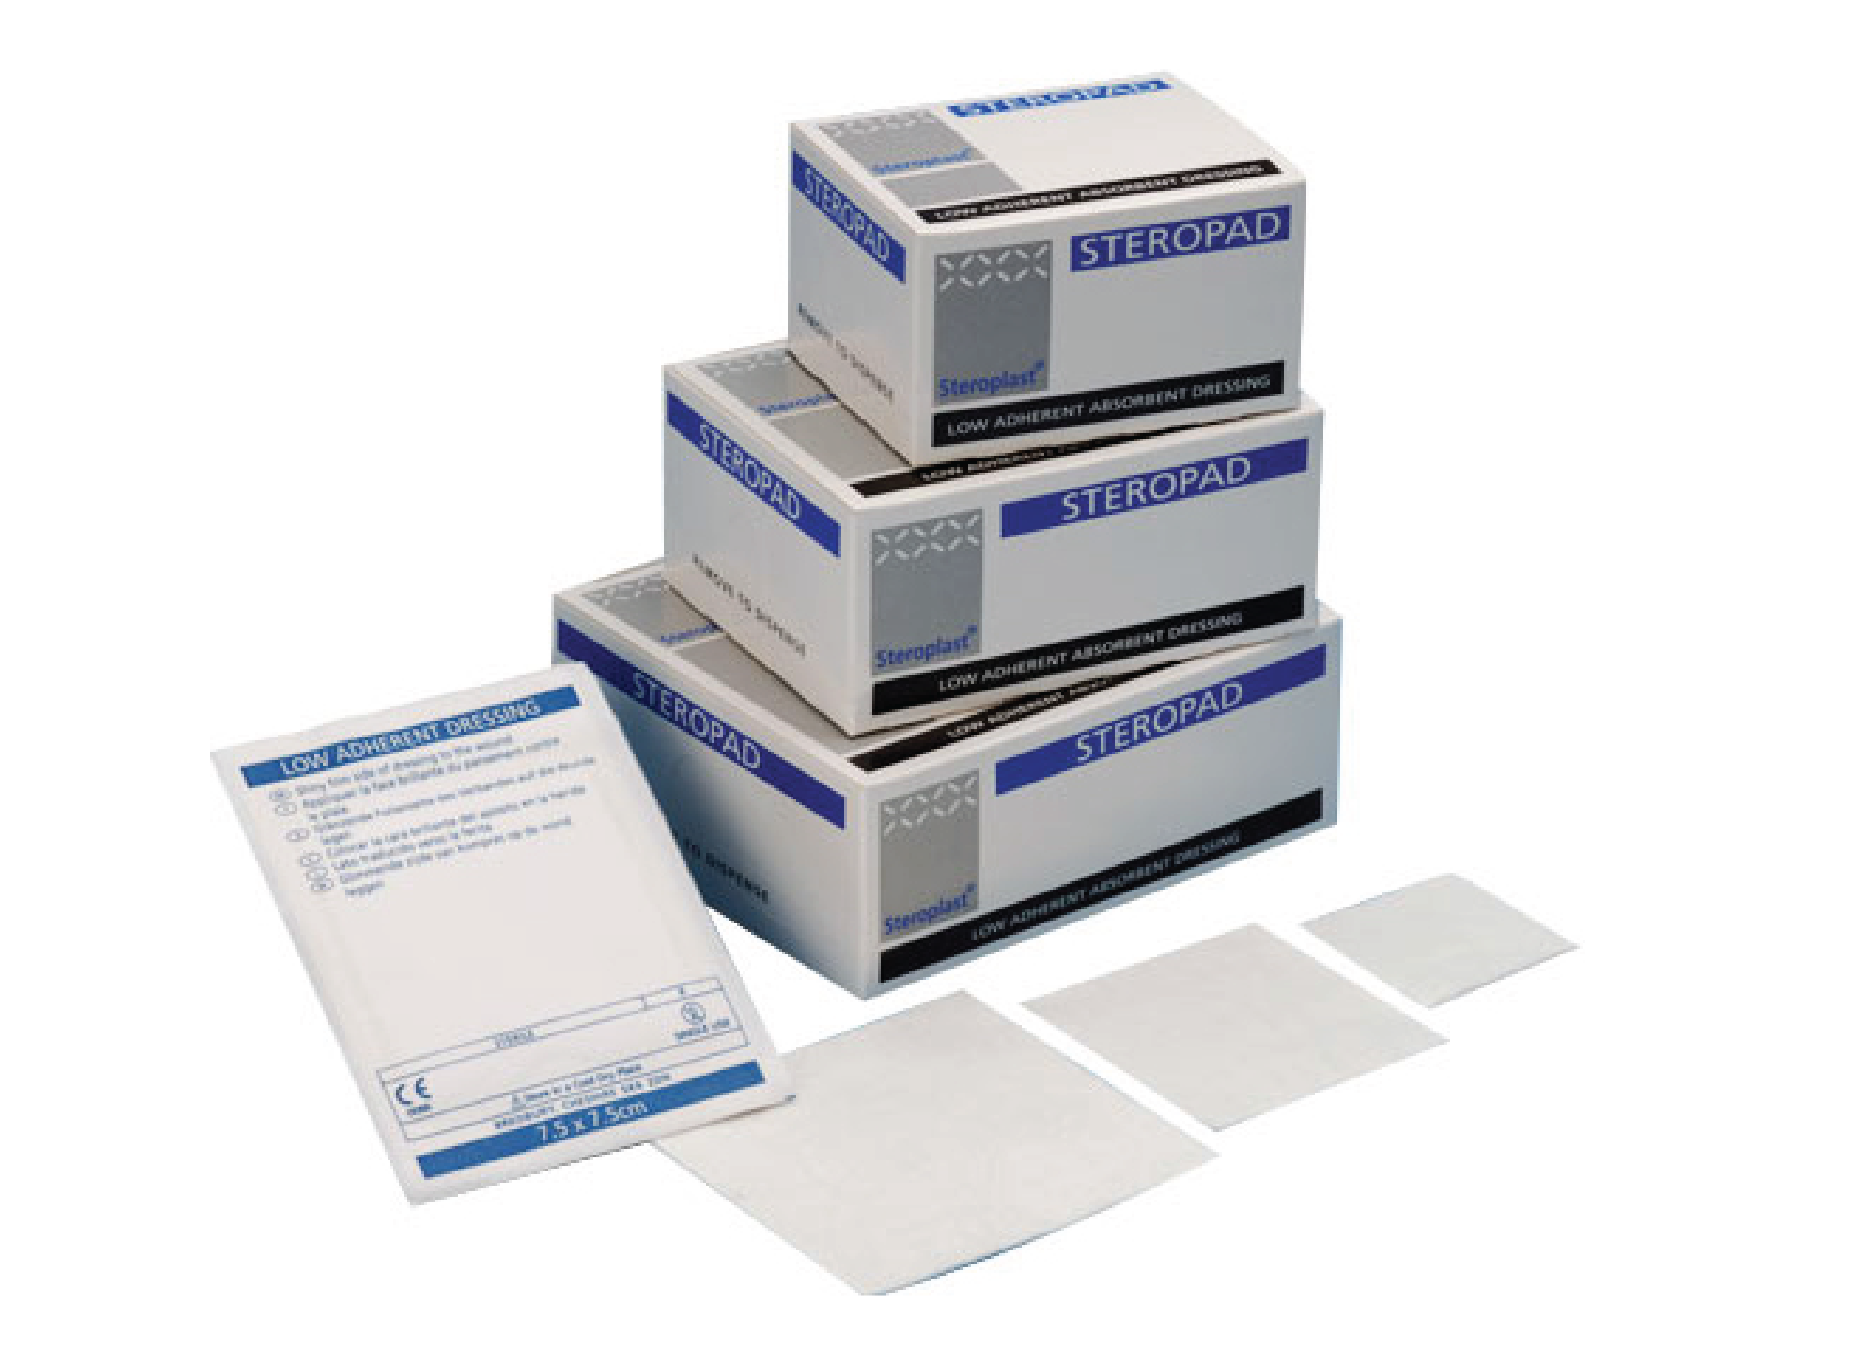 Buy plasters, bandages, and other first-aid consumables which are all of medical-grade quality and CE marked for professional use.